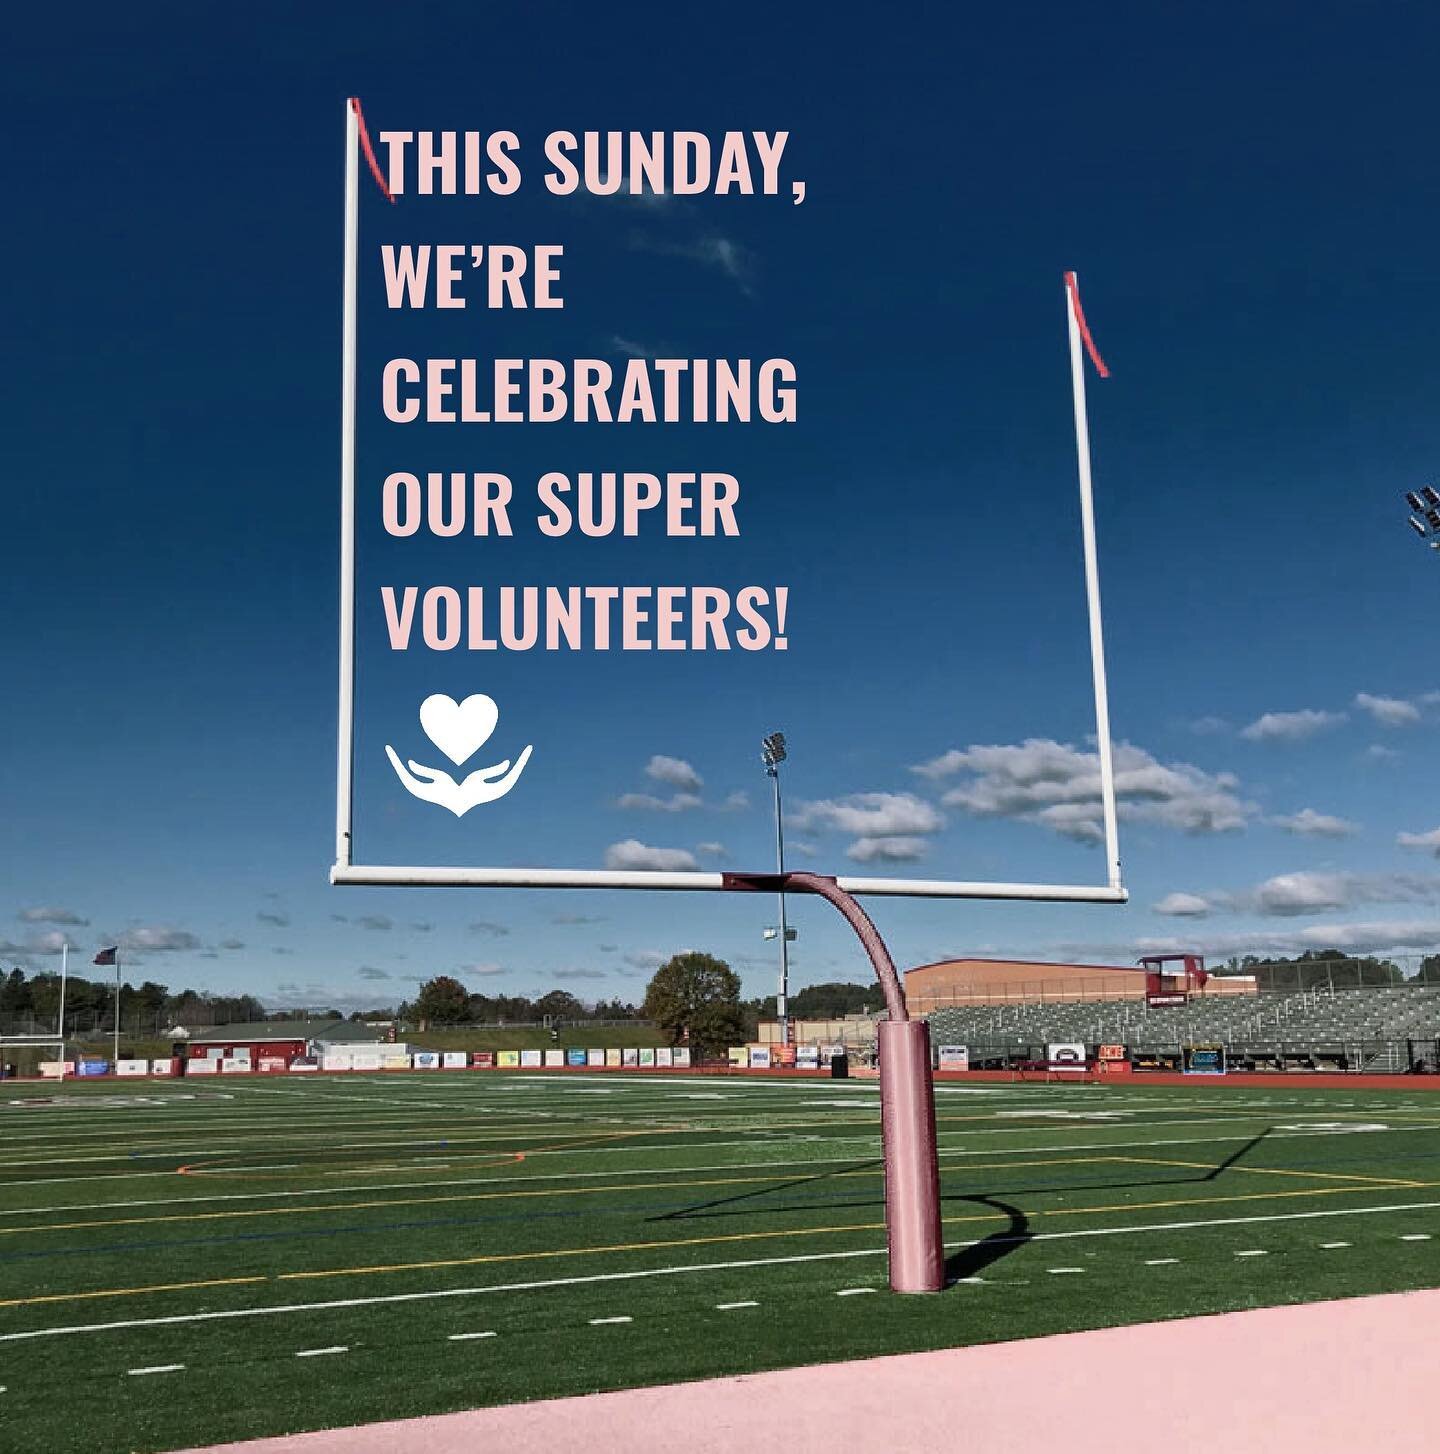 With the Super Bowl over, our volunteers are the only touchdowns we care about 🏈🥳